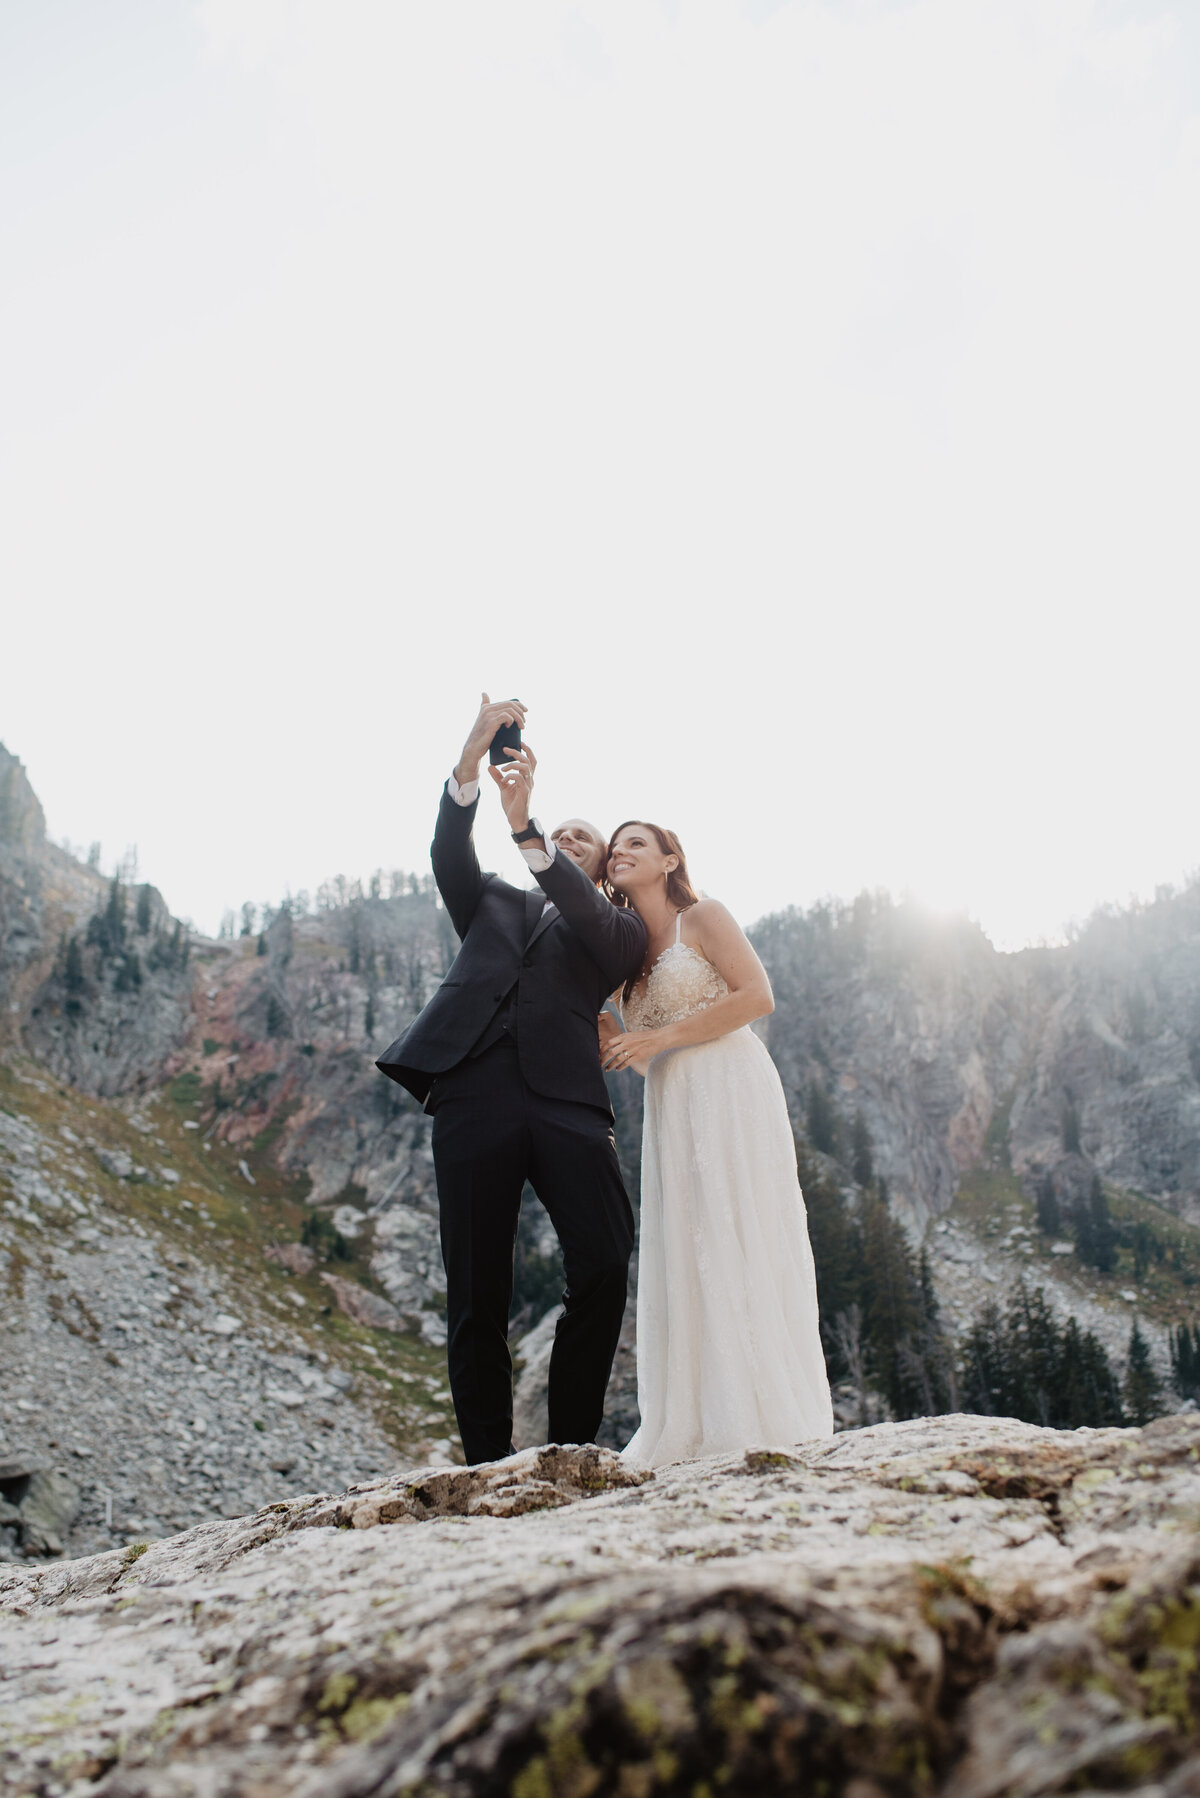 Jackson Hole photographers capture bride and groom facetiming family